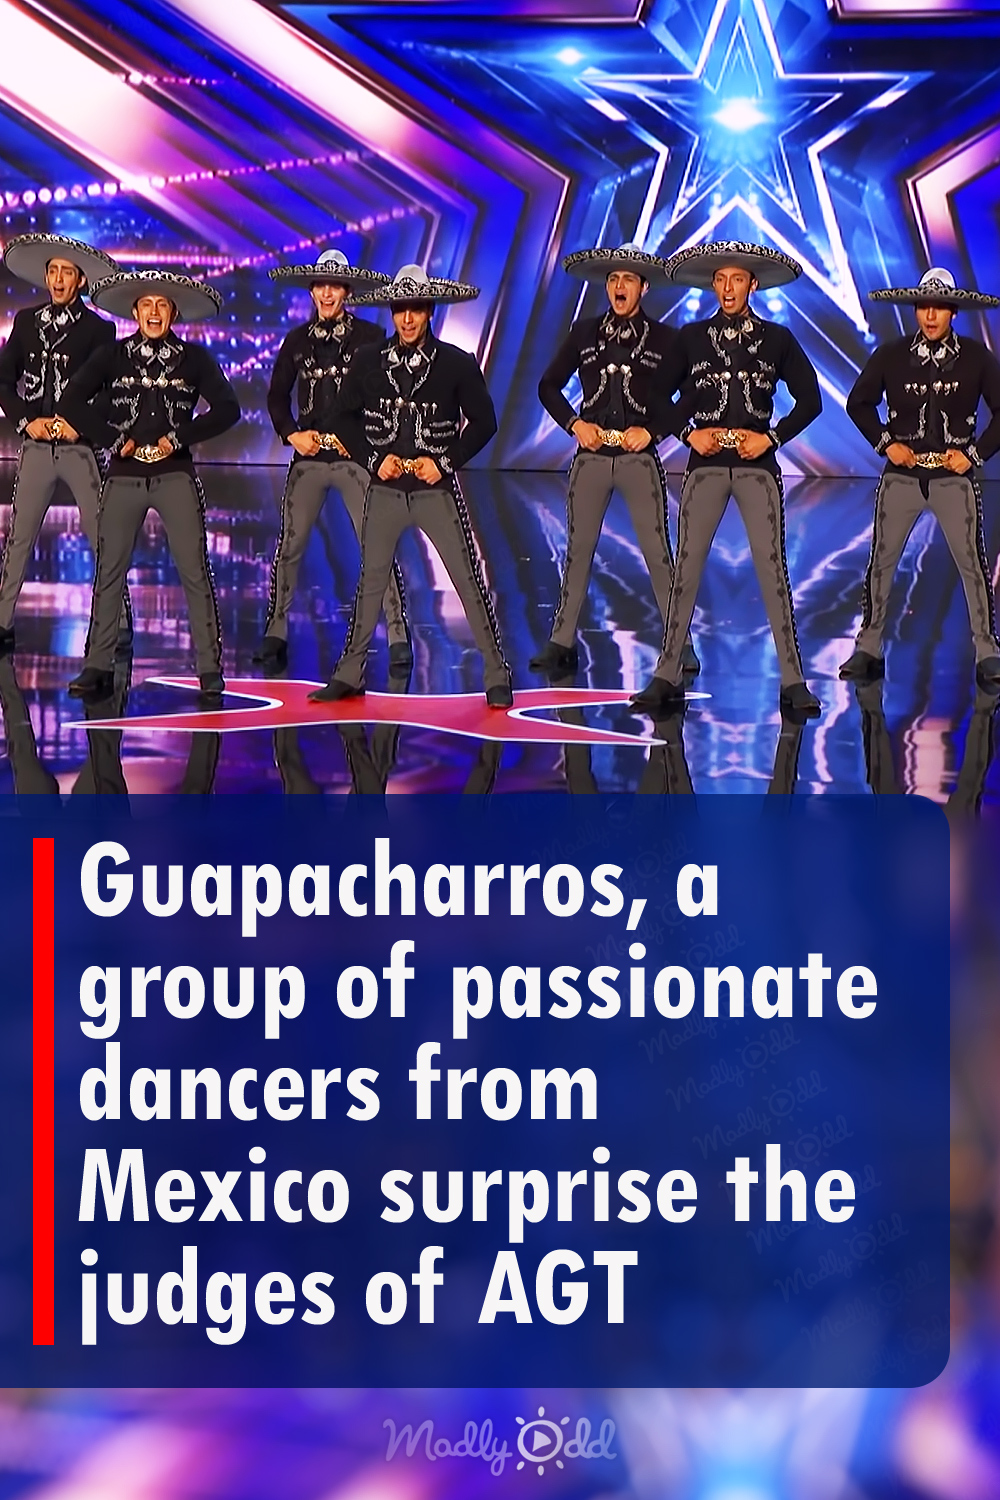 Guapacharros, a group of passionate dancers from Mexico surprise the judges of AGT